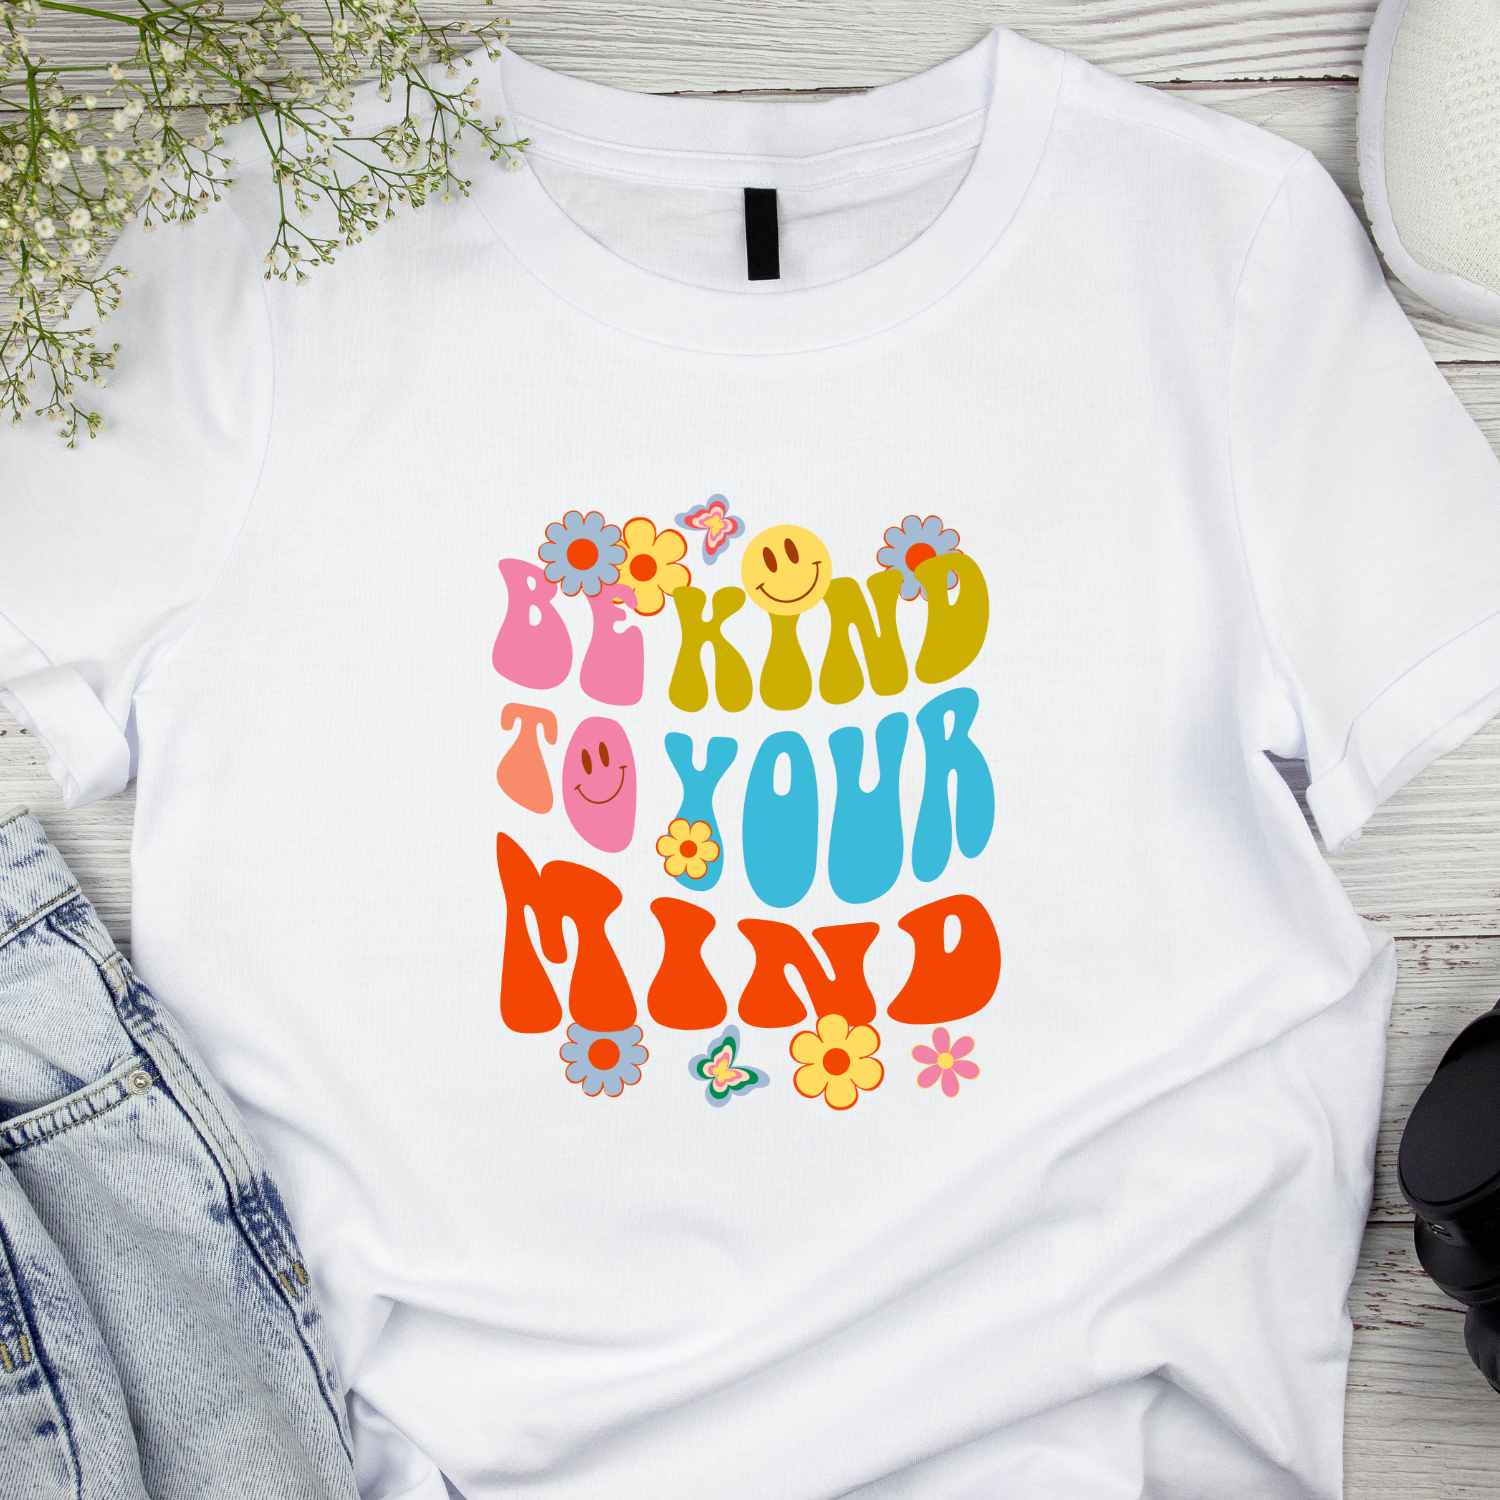 Be kind to your mind free tshirt design